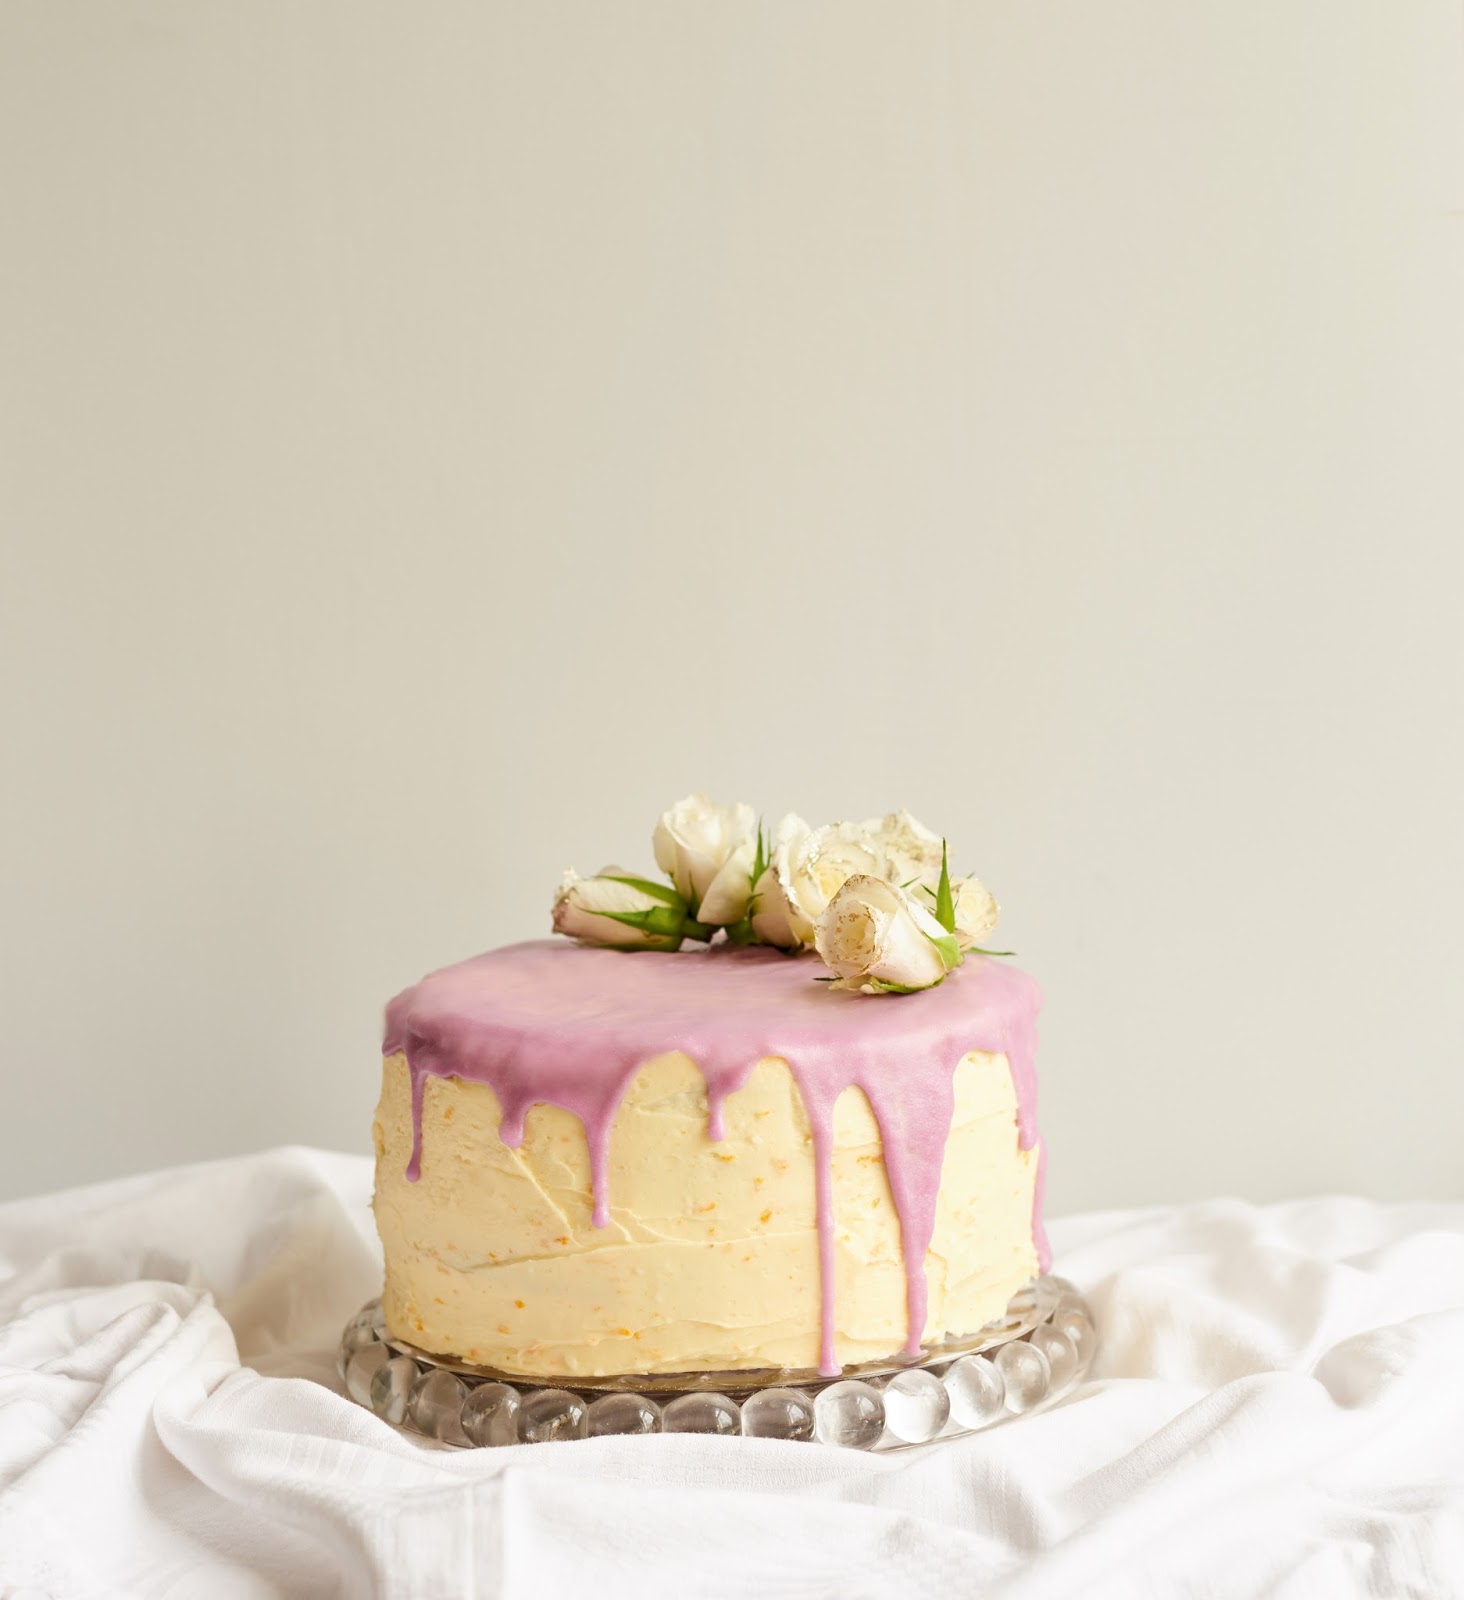 10 Yummy Cakes To Try Out And Impress Your Friends